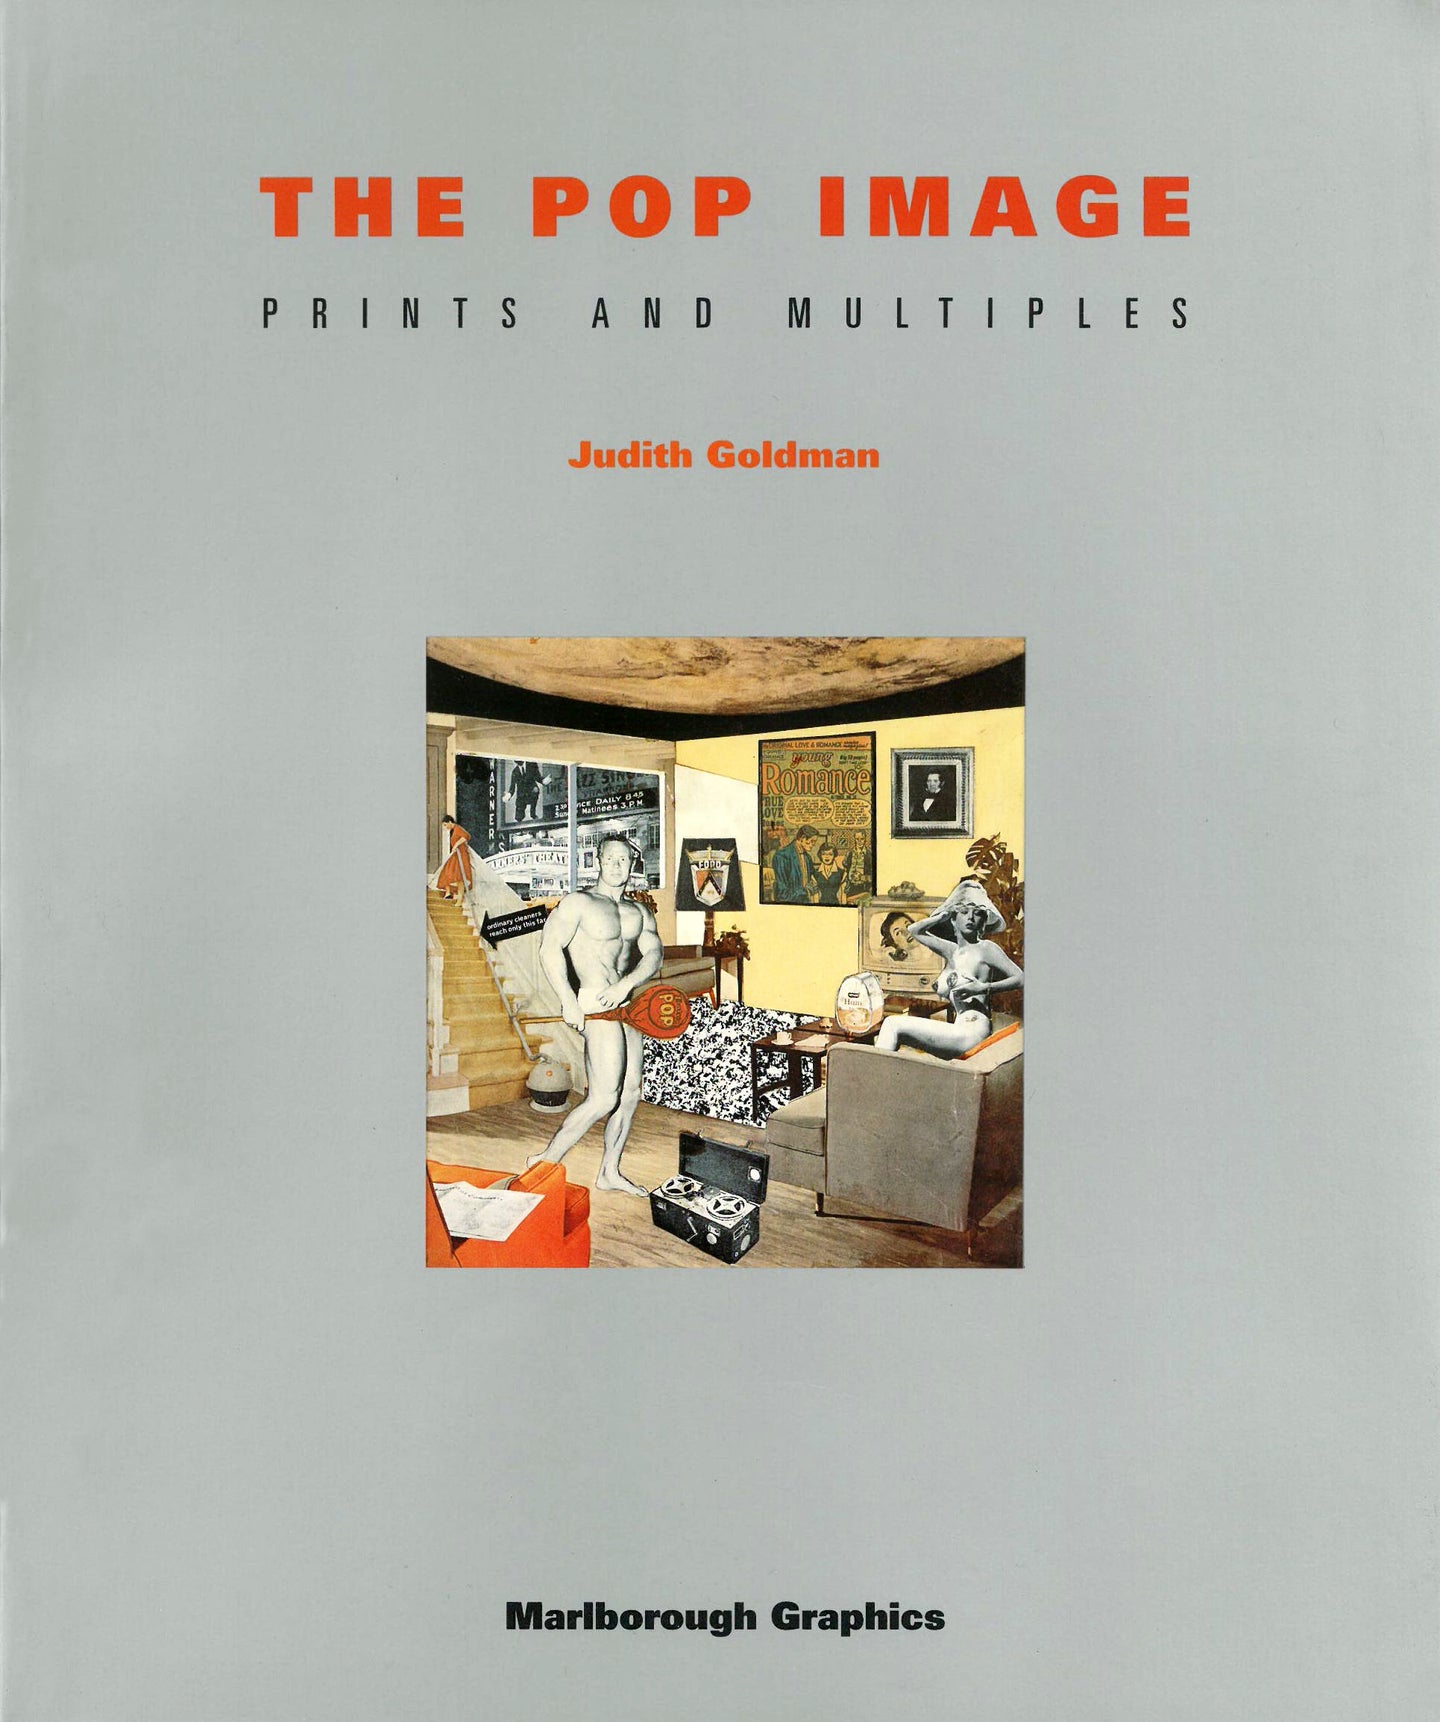 The Pop Image: Prints and Multiples